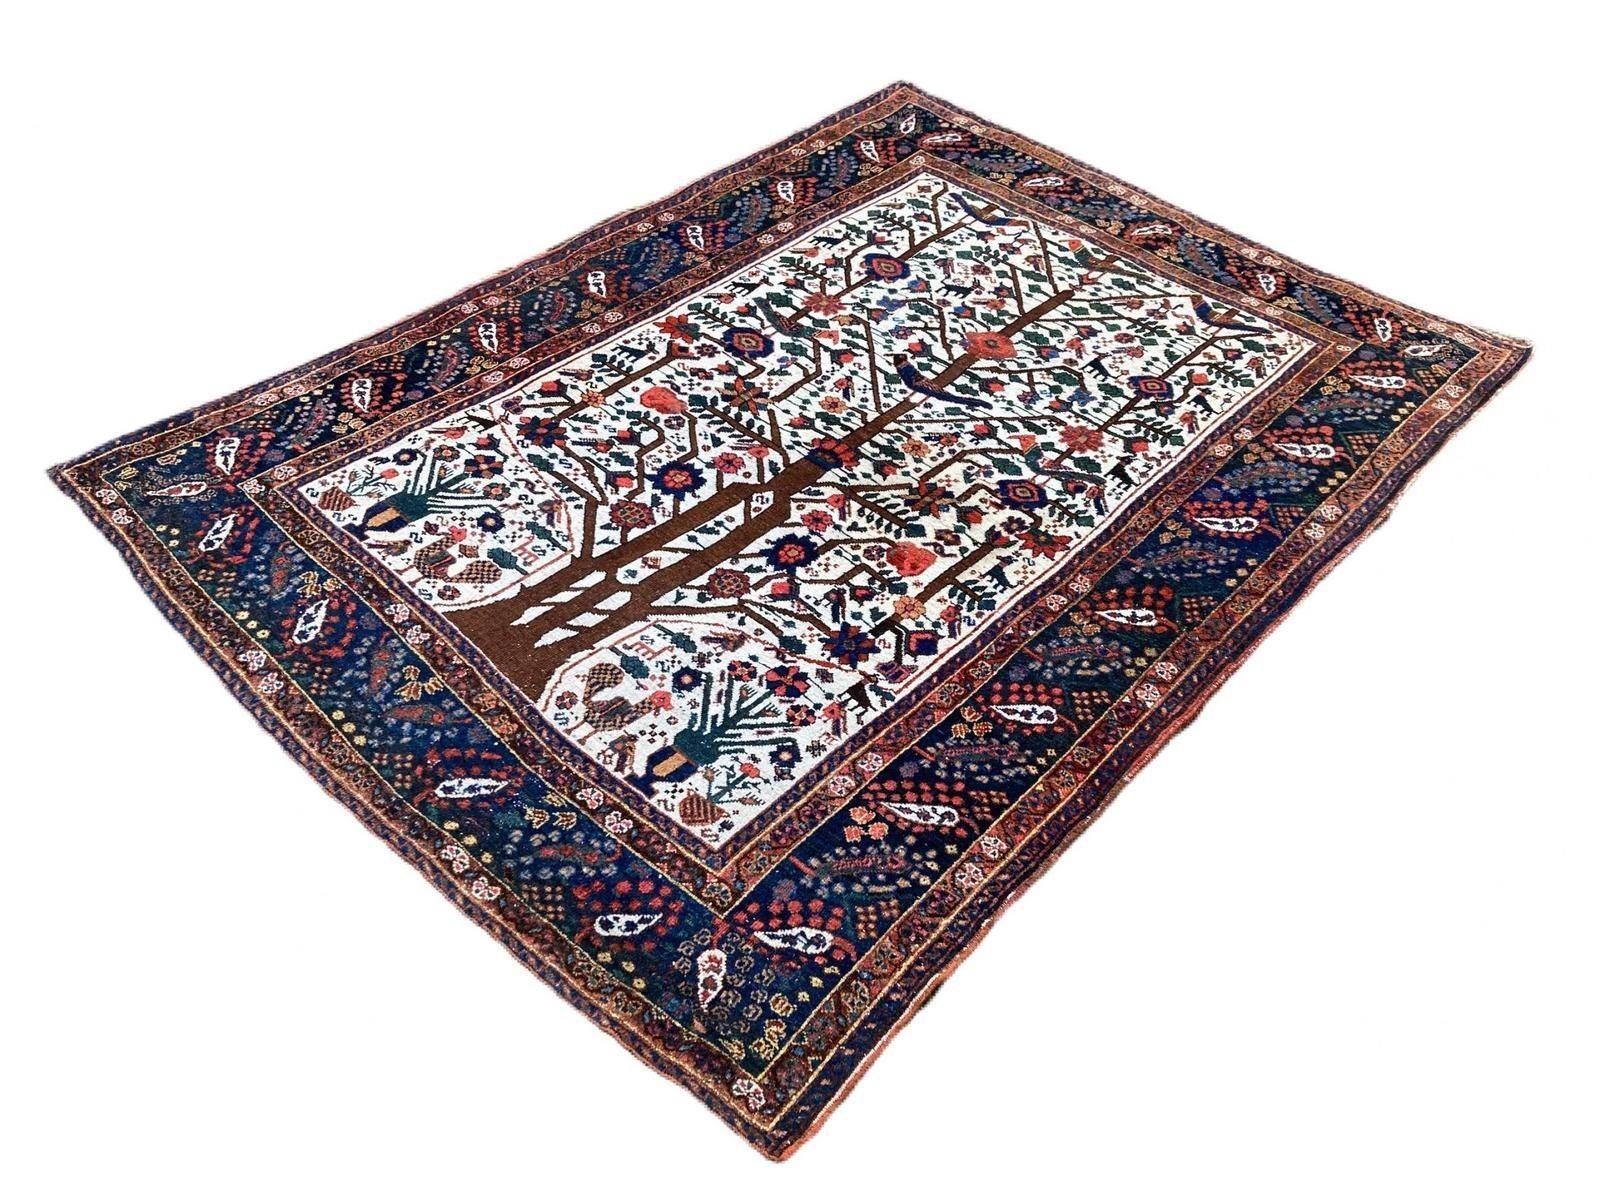 Antique Neyriz Rug 2.02m X 1.54m In Good Condition For Sale In St. Albans, GB